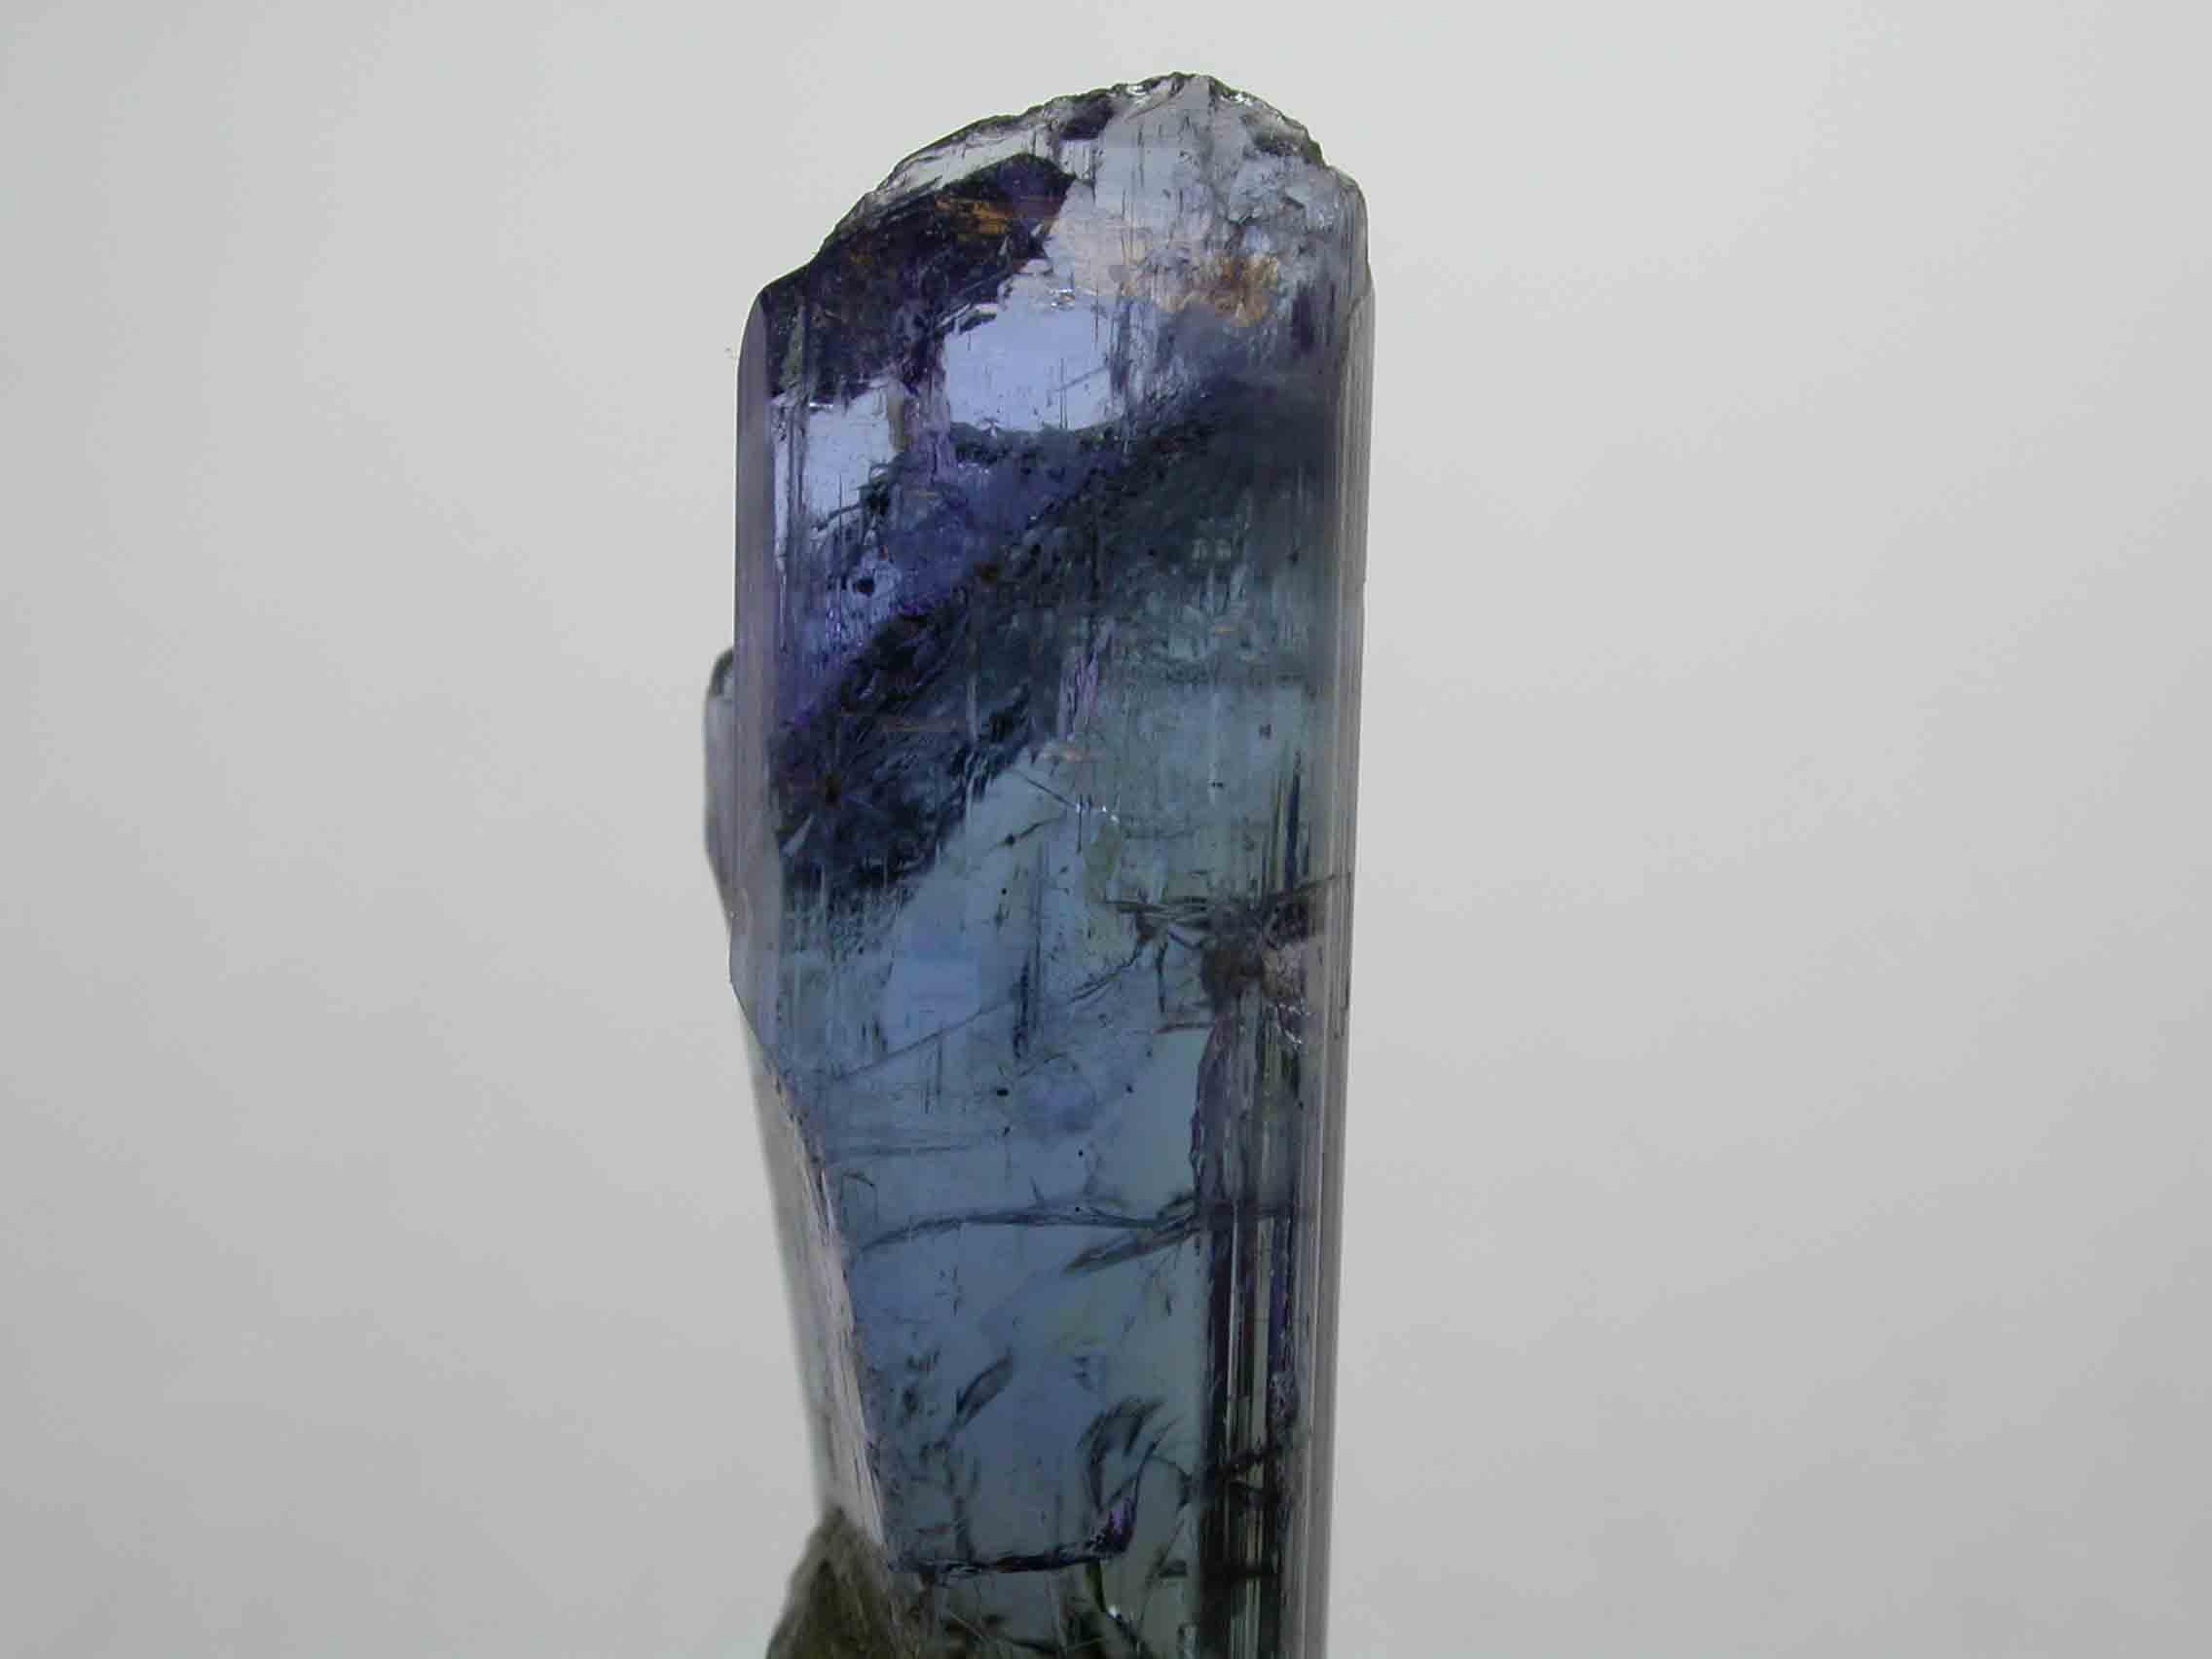 16 Inches Glass Vase Sculpture Hand Crafted and Designed Elegant yet Durable 3 Layers Blue